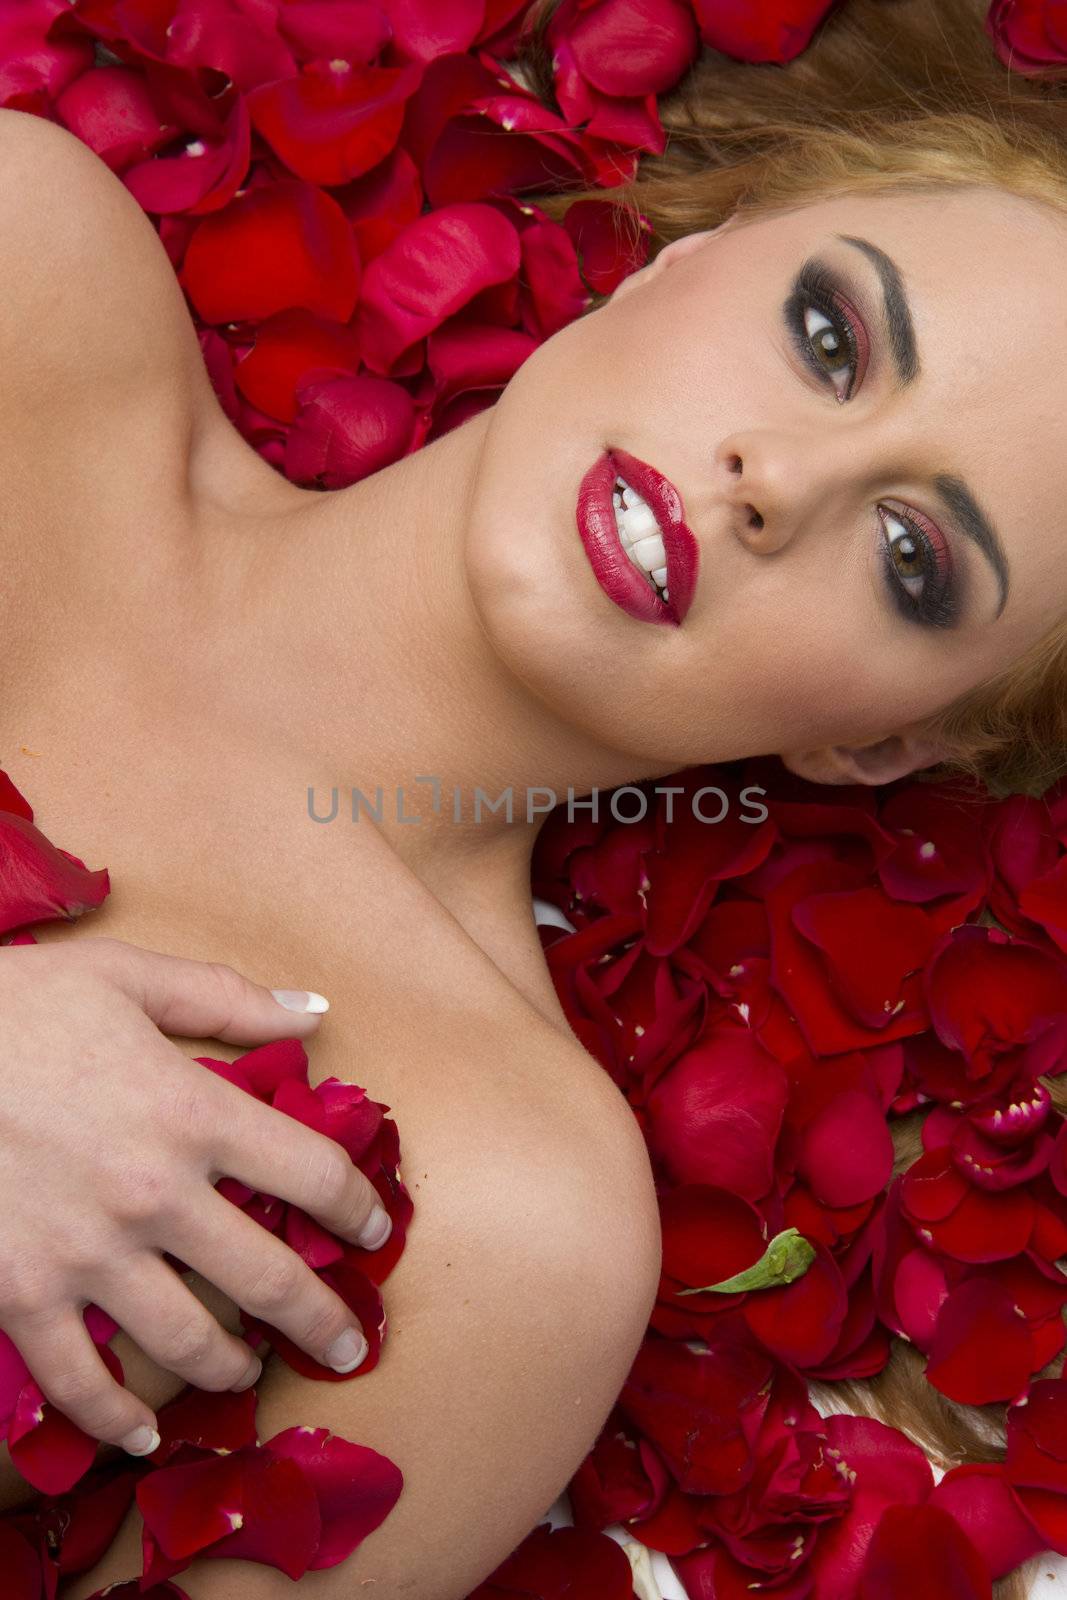 Nude in Red Rose Petals by ChrisBoswell